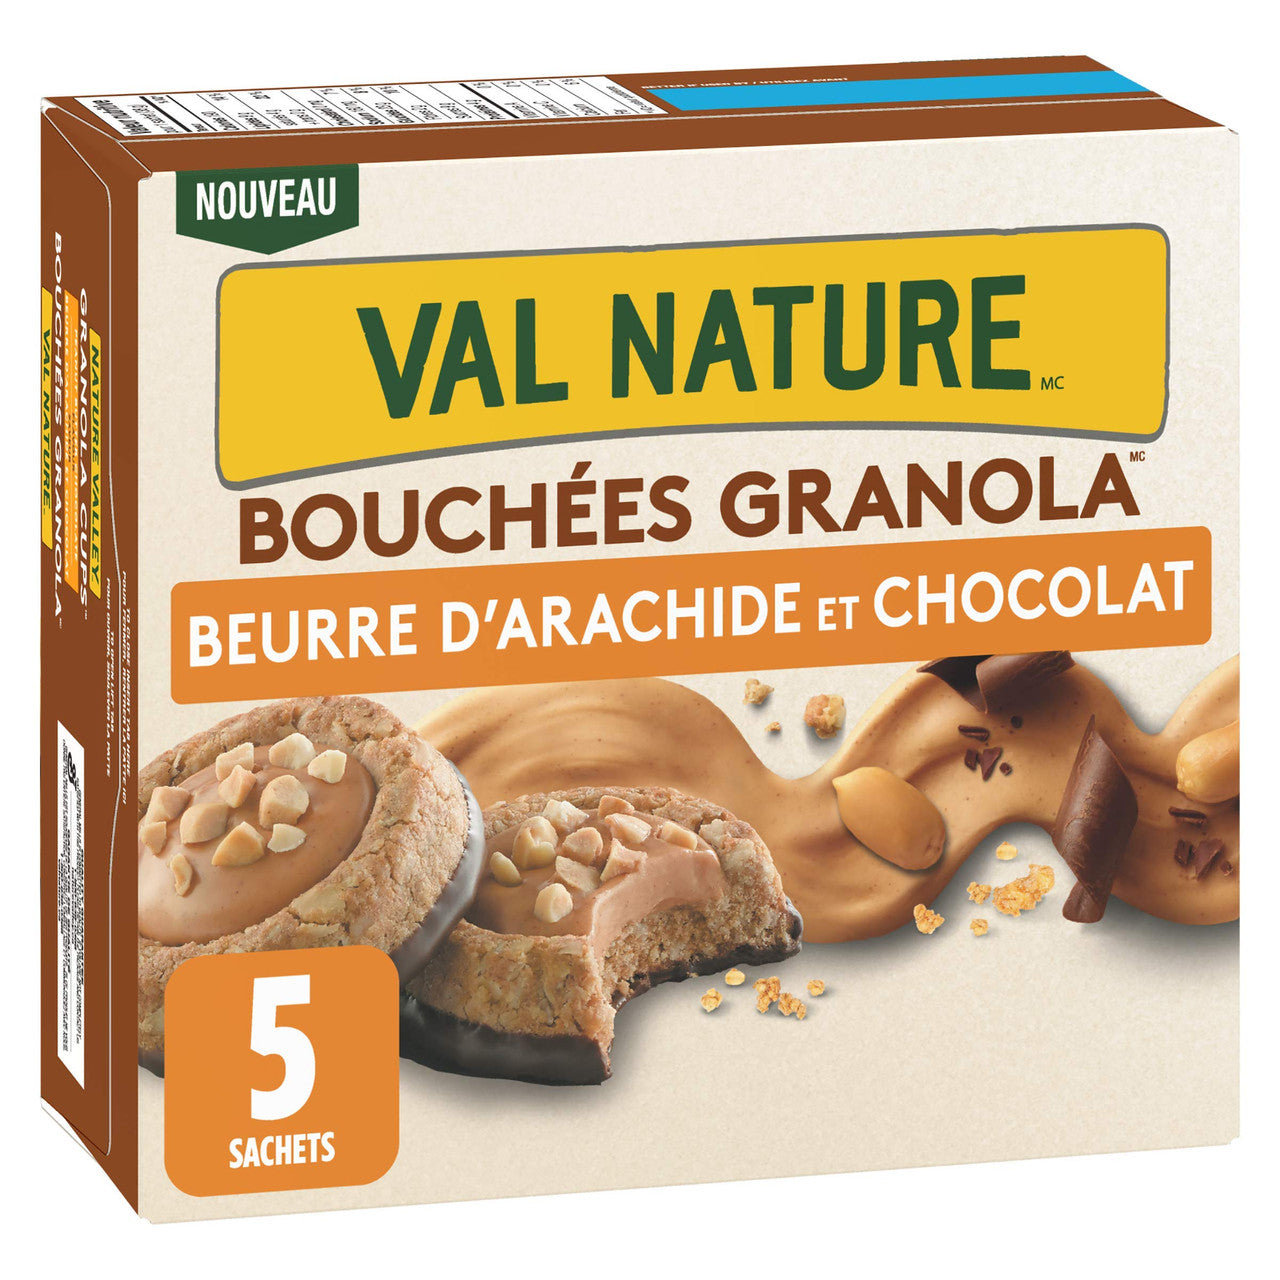 NATURE VALLEY, Granola Cups Peanut Butter Chocolate Flavour, 5ct, 191g/6.7oz., {Imported from Canada}